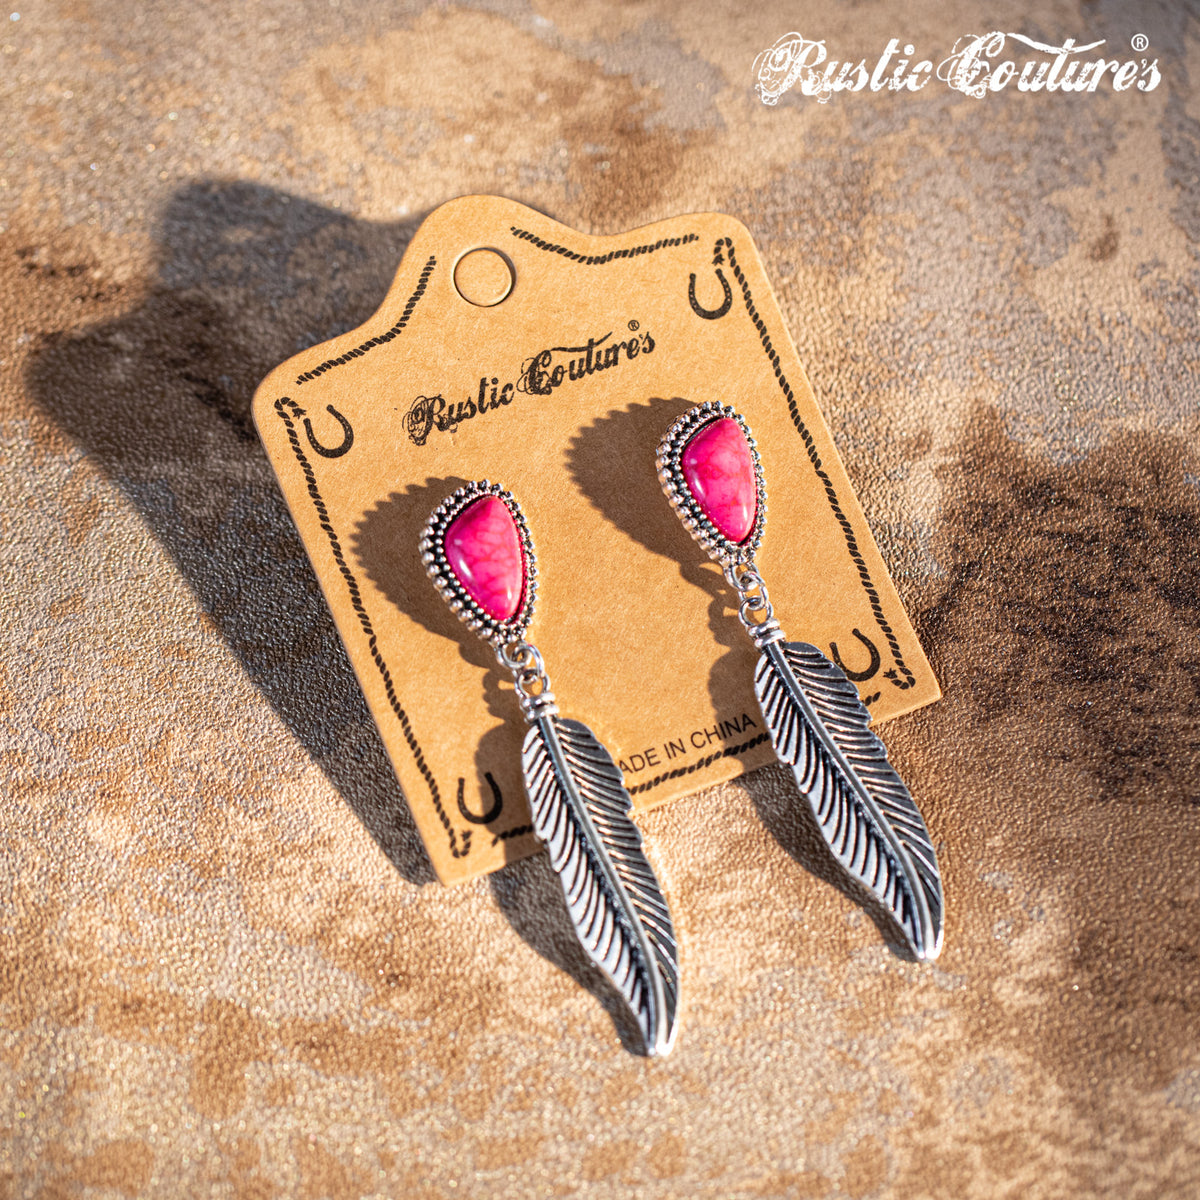 Rustic Couture's Hot Pink Nature Stone with Feather Silver Dangling Earring - Cowgirl Wear